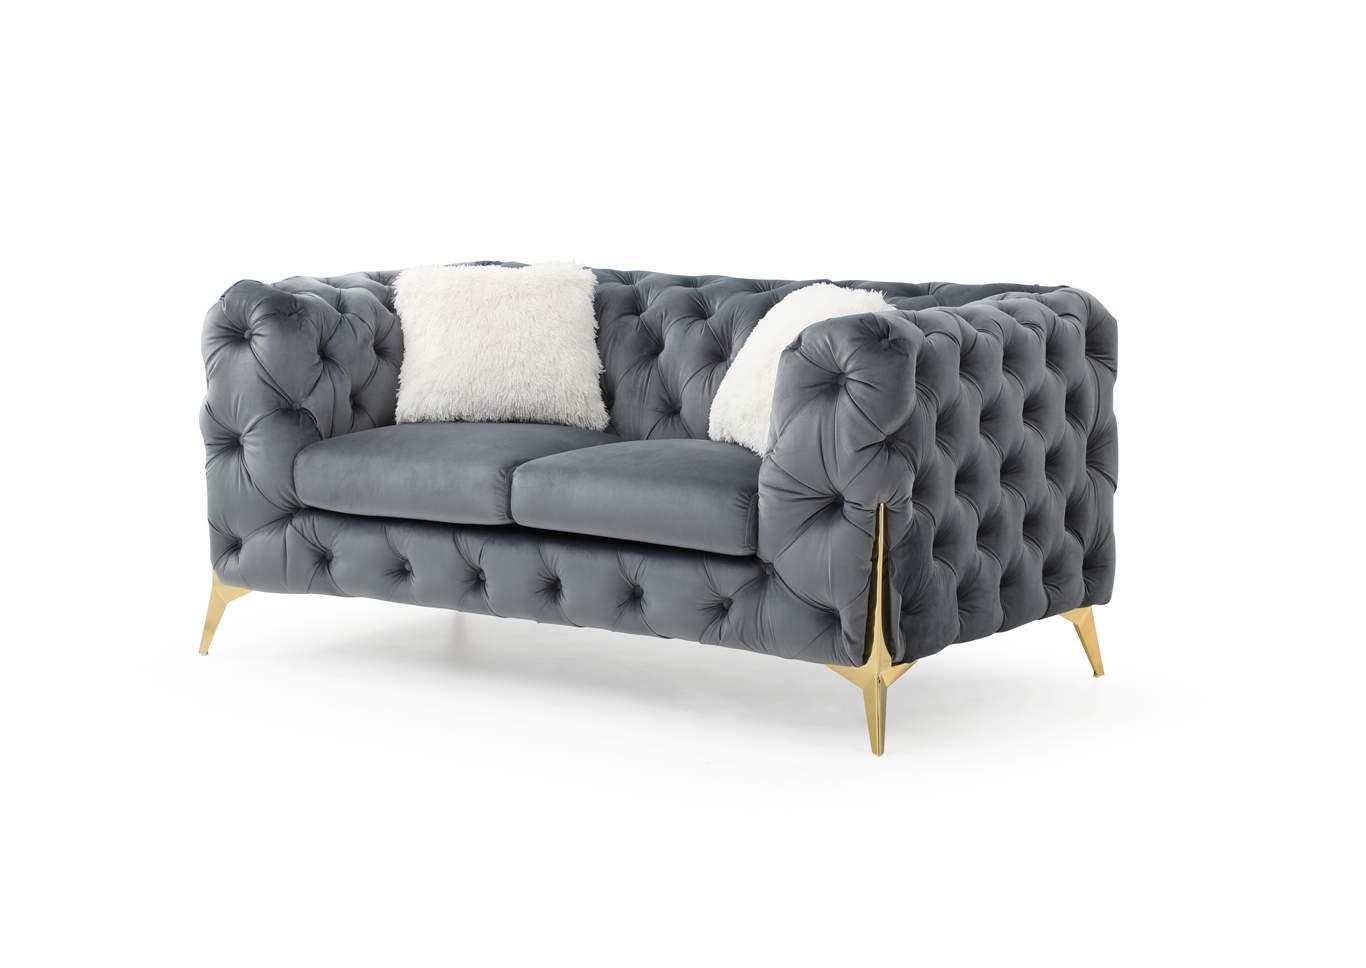 Contemporary, Modern Loveseat MODERNO GHF-808857951649 in Gray Fabric